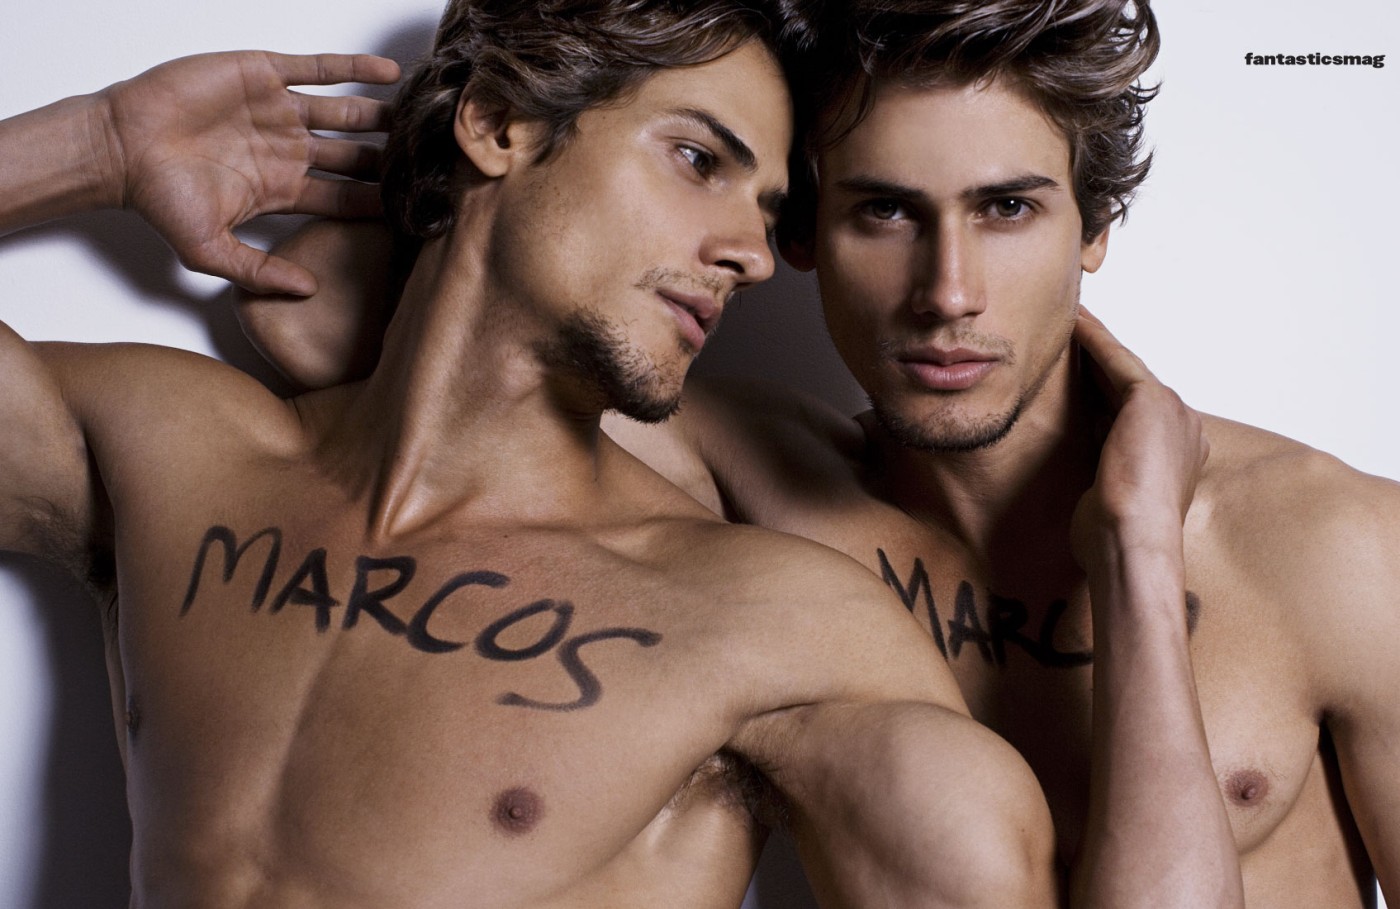 Mike Kagee Fashion Blog The Hottest Brazilian Twins In The World The